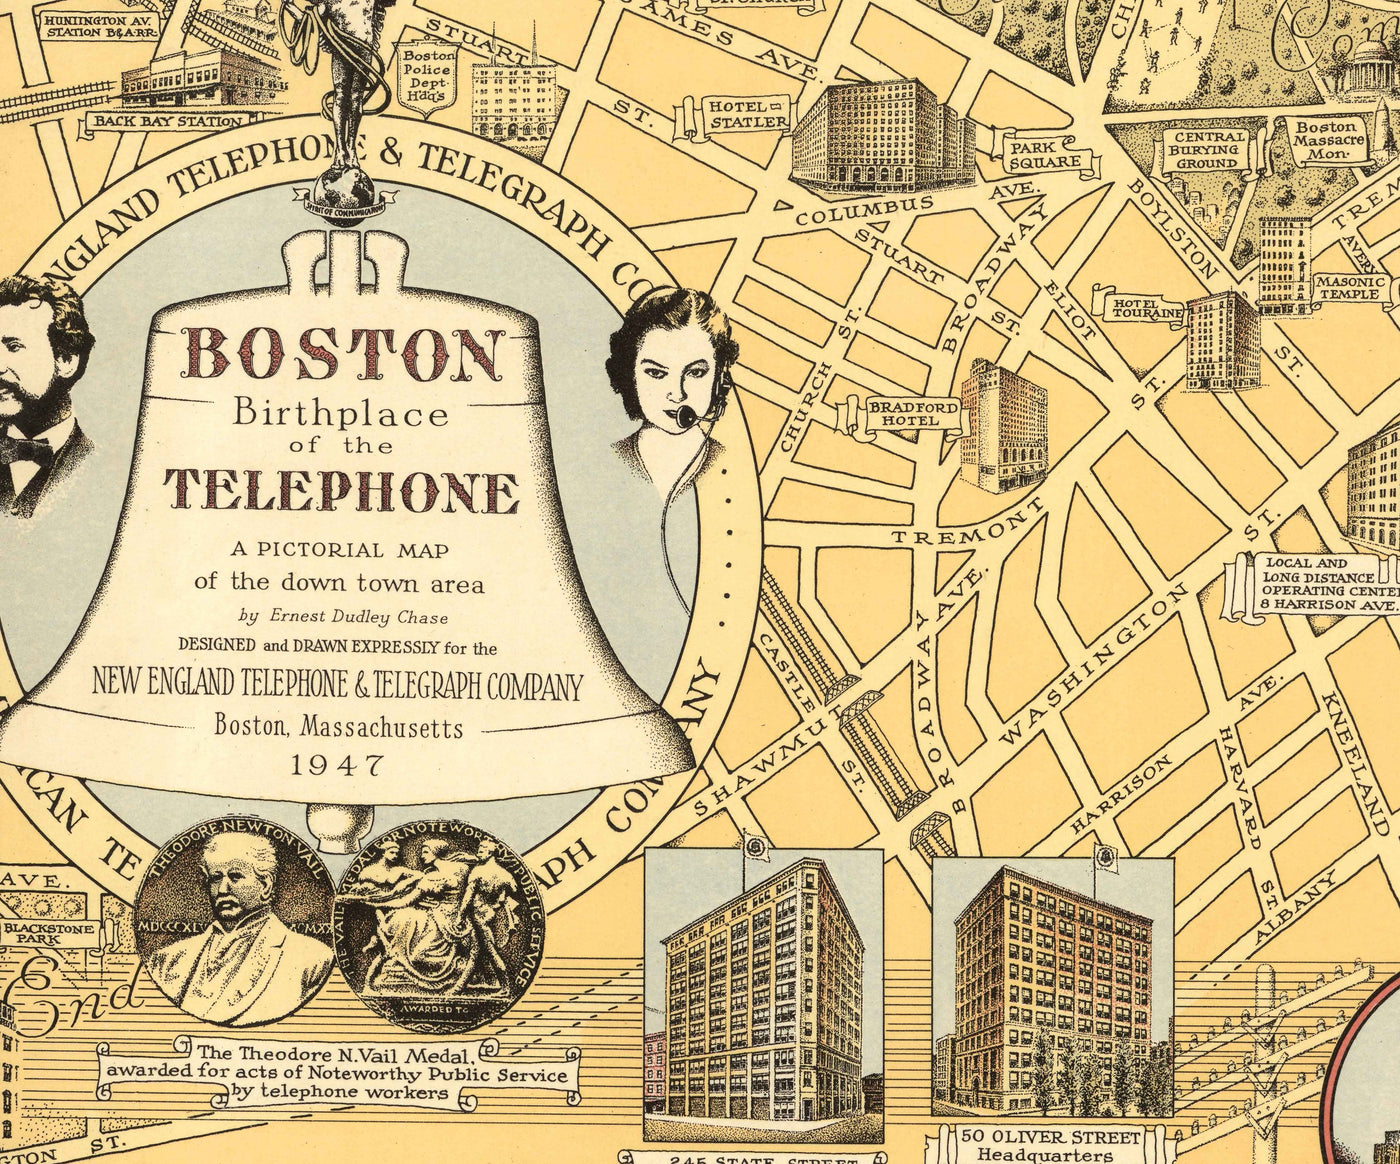 Old Pictorial Map of Boston, 1947 Ernest Dudley Chase - Birth of the Telephone, Graham Bell, Beacon Hill, Downtown